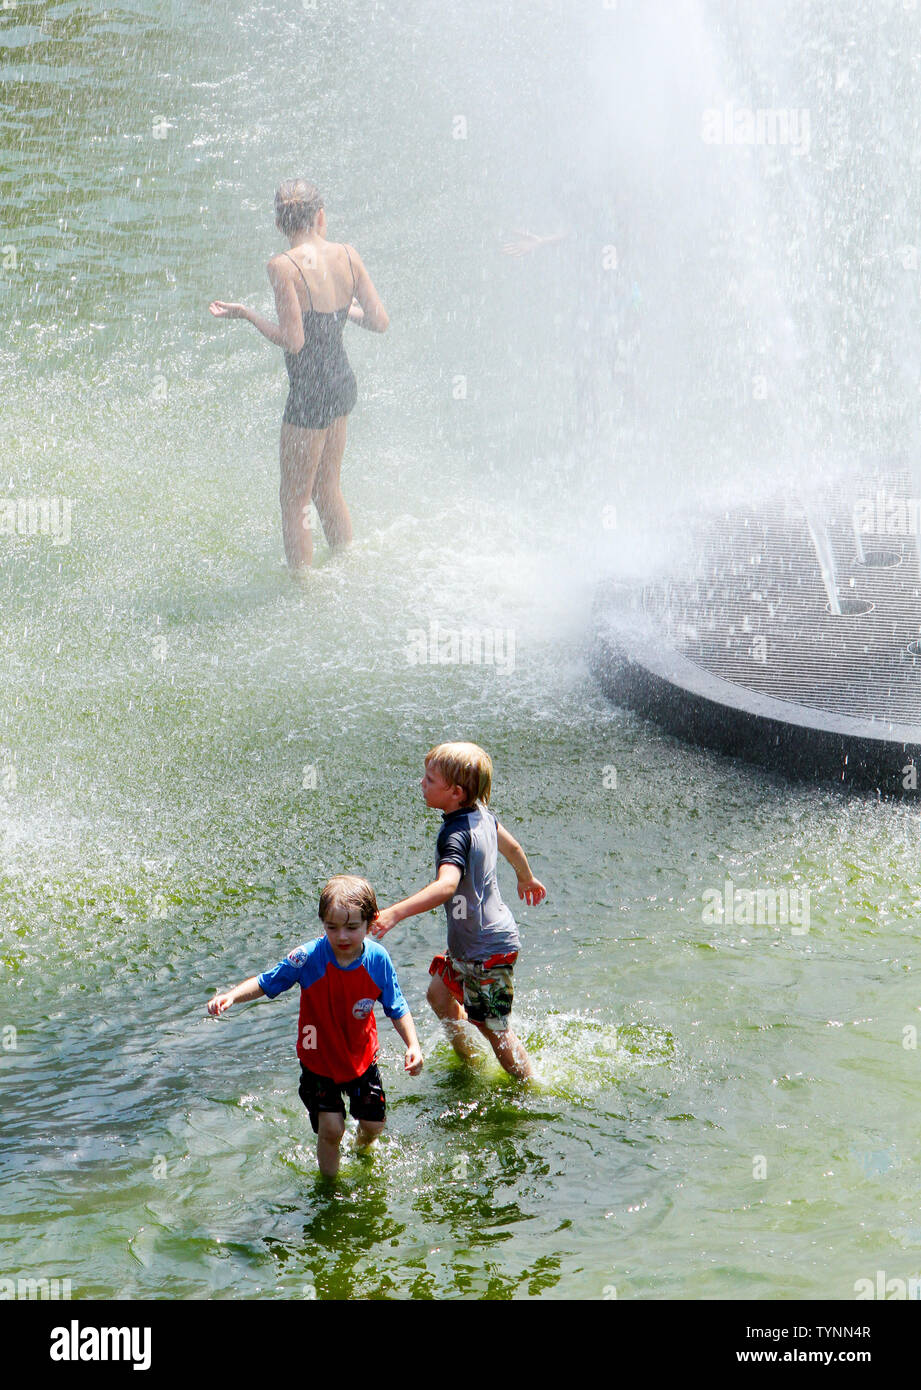 People splash around in the fountain in Washington Square Park as temperatures approach the triple digit mark on July 18, 2013 in New York. People are finding ways to stay cool as heat advisories are in effect while an oppressive heat wave continues across the area.     UPI/Monika Graff Stock Photo